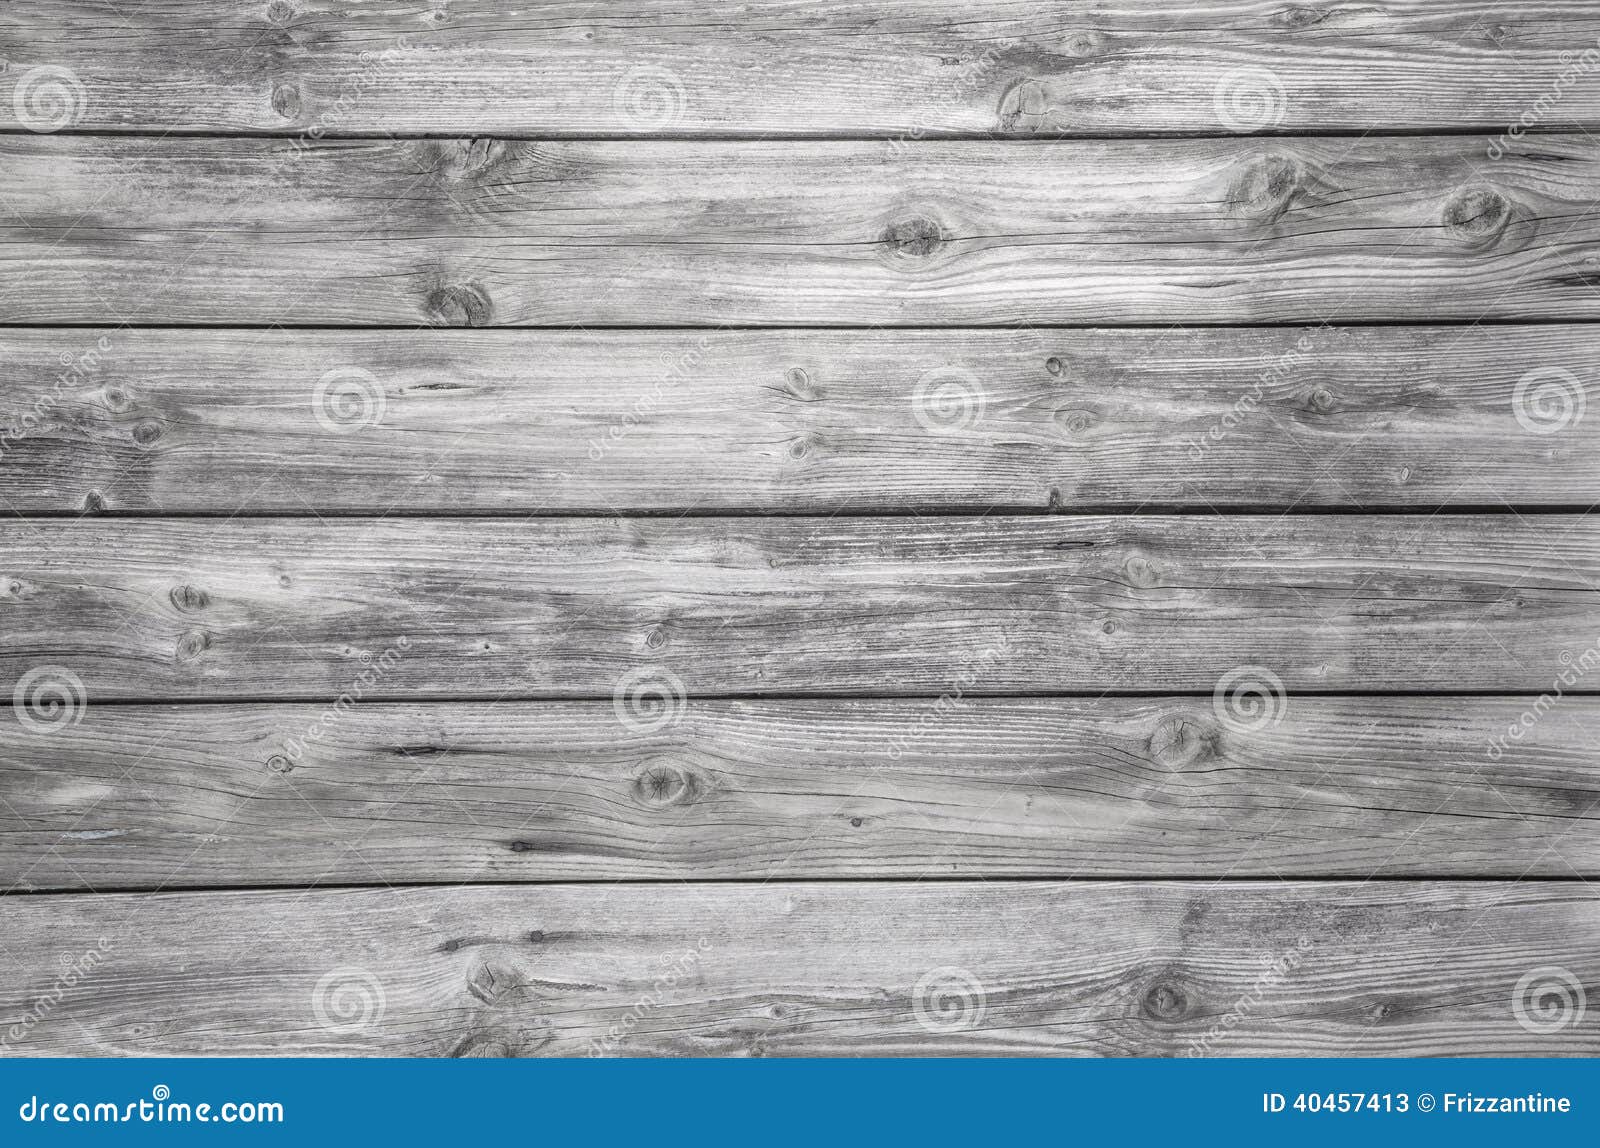 old grey wooden background - nobody and empty.